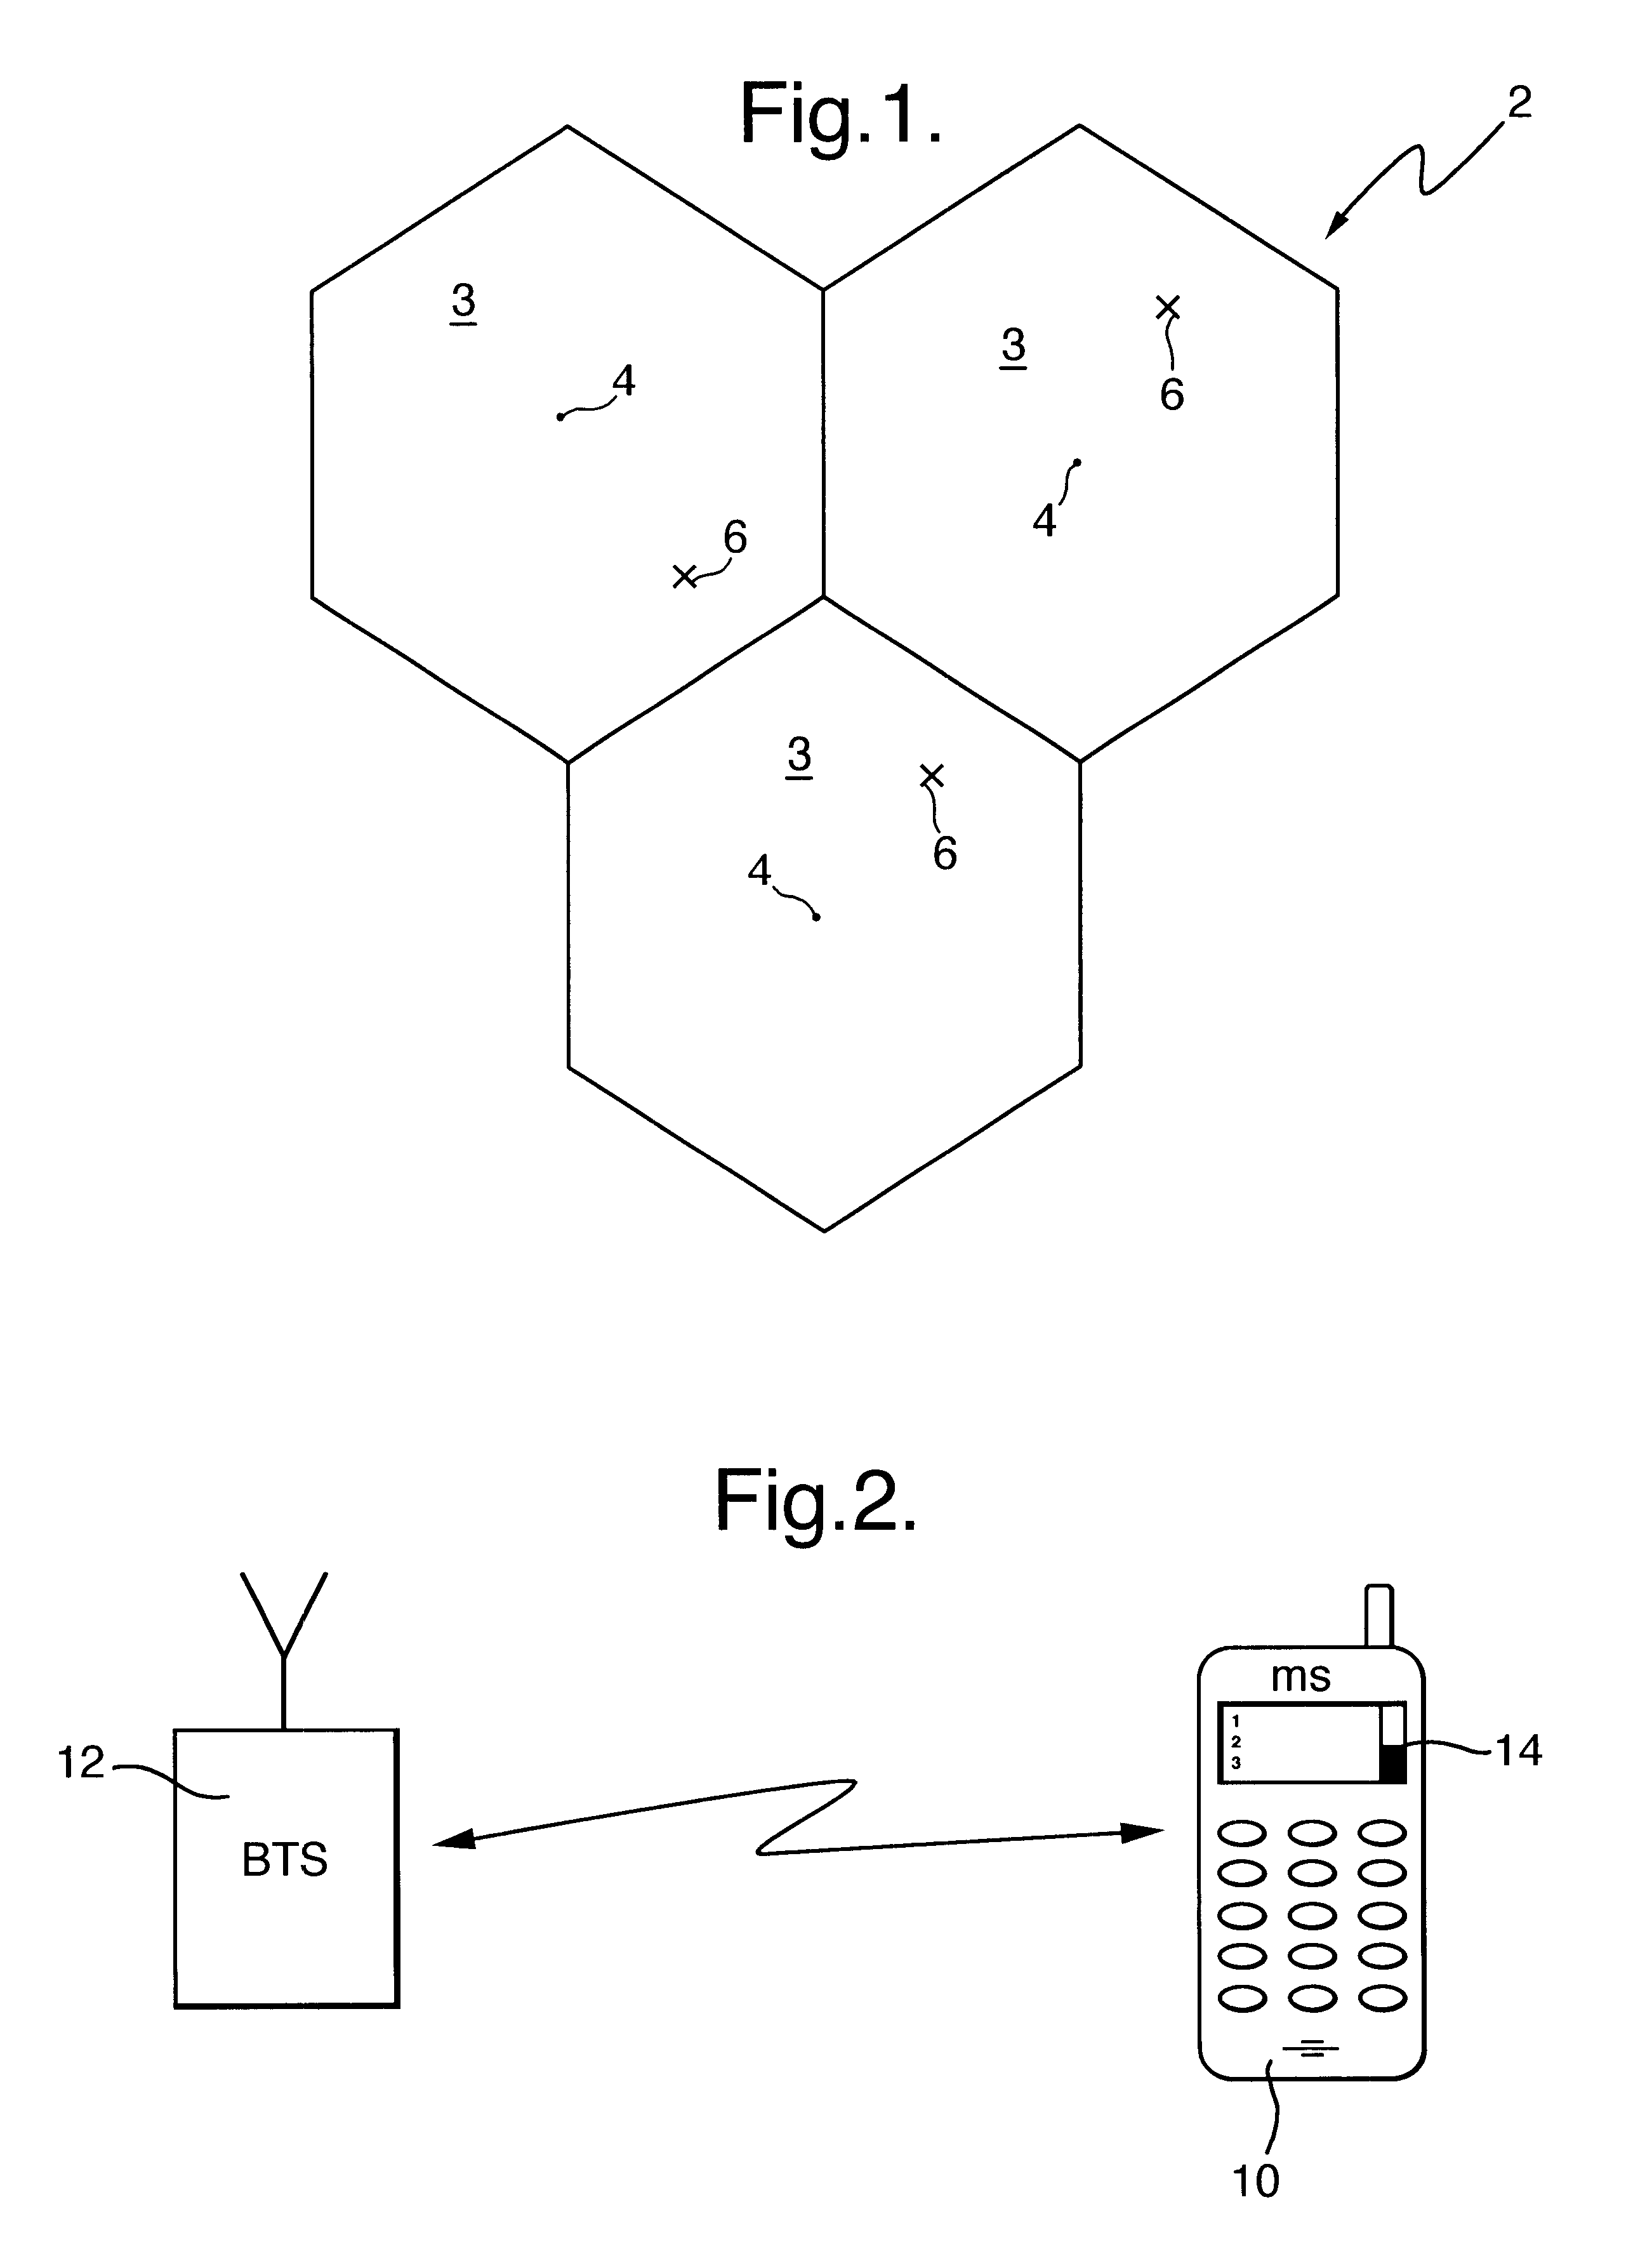 Method for determining service availability